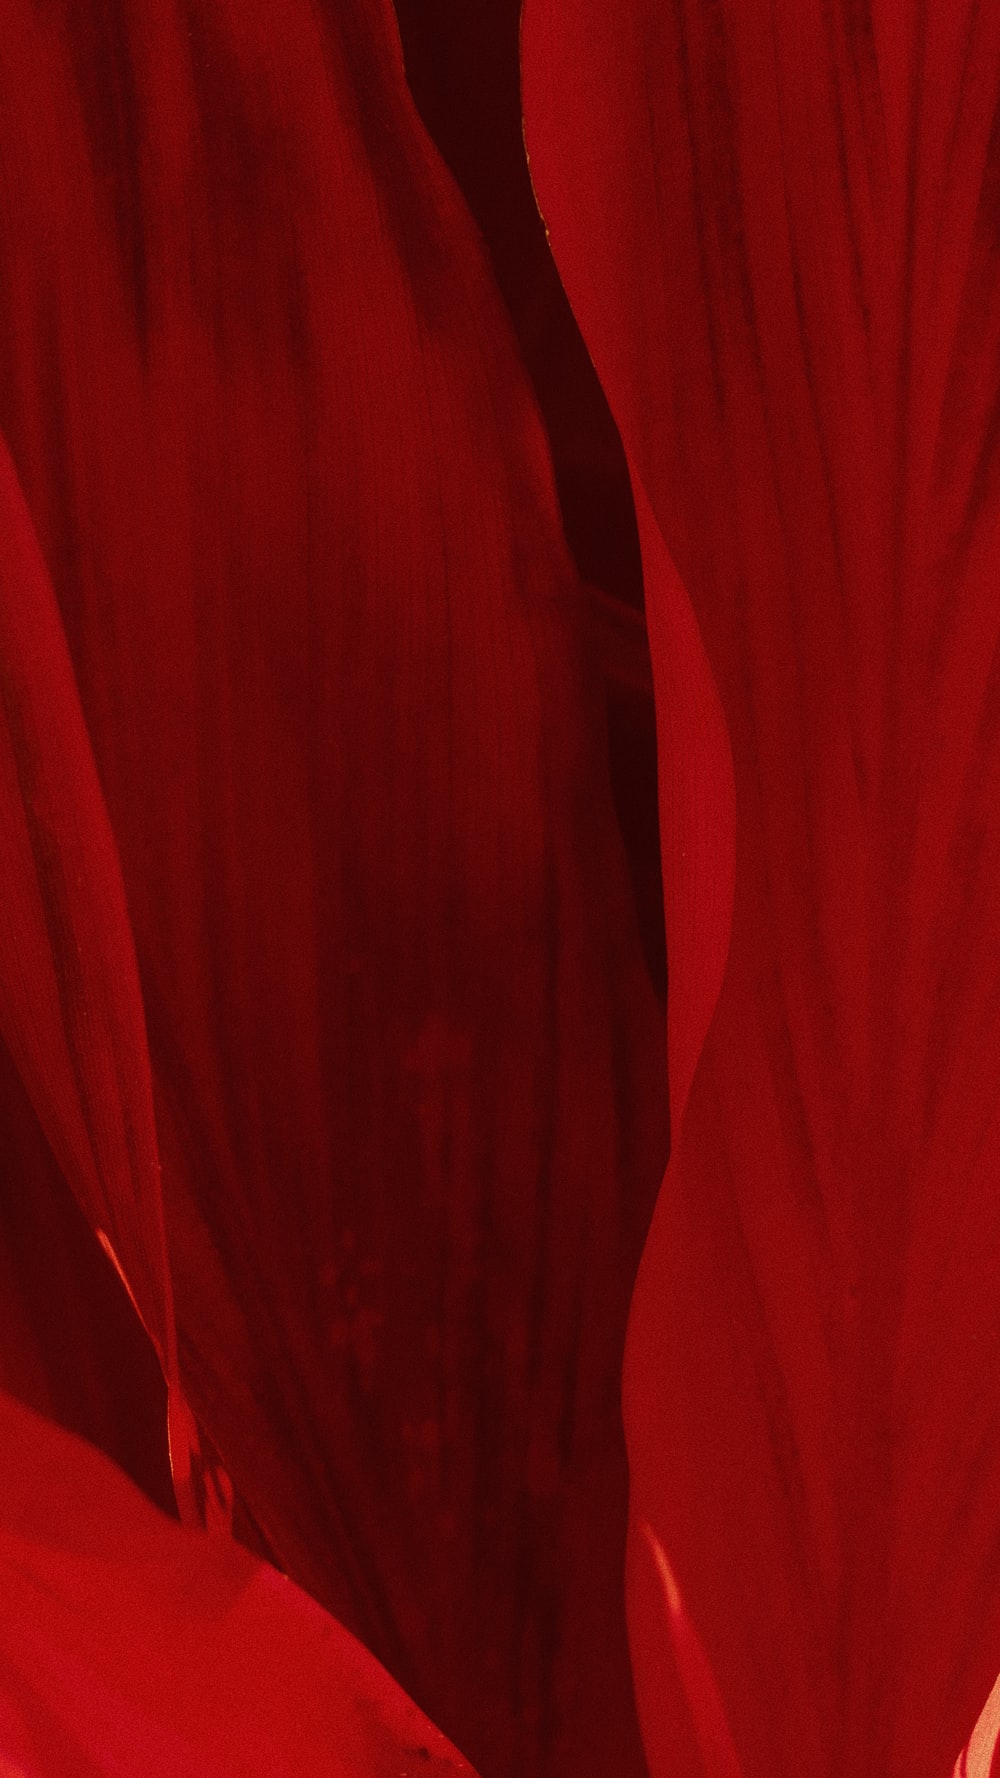 Detail Abstract Red Wallpaper 1920x1080 Nomer 39